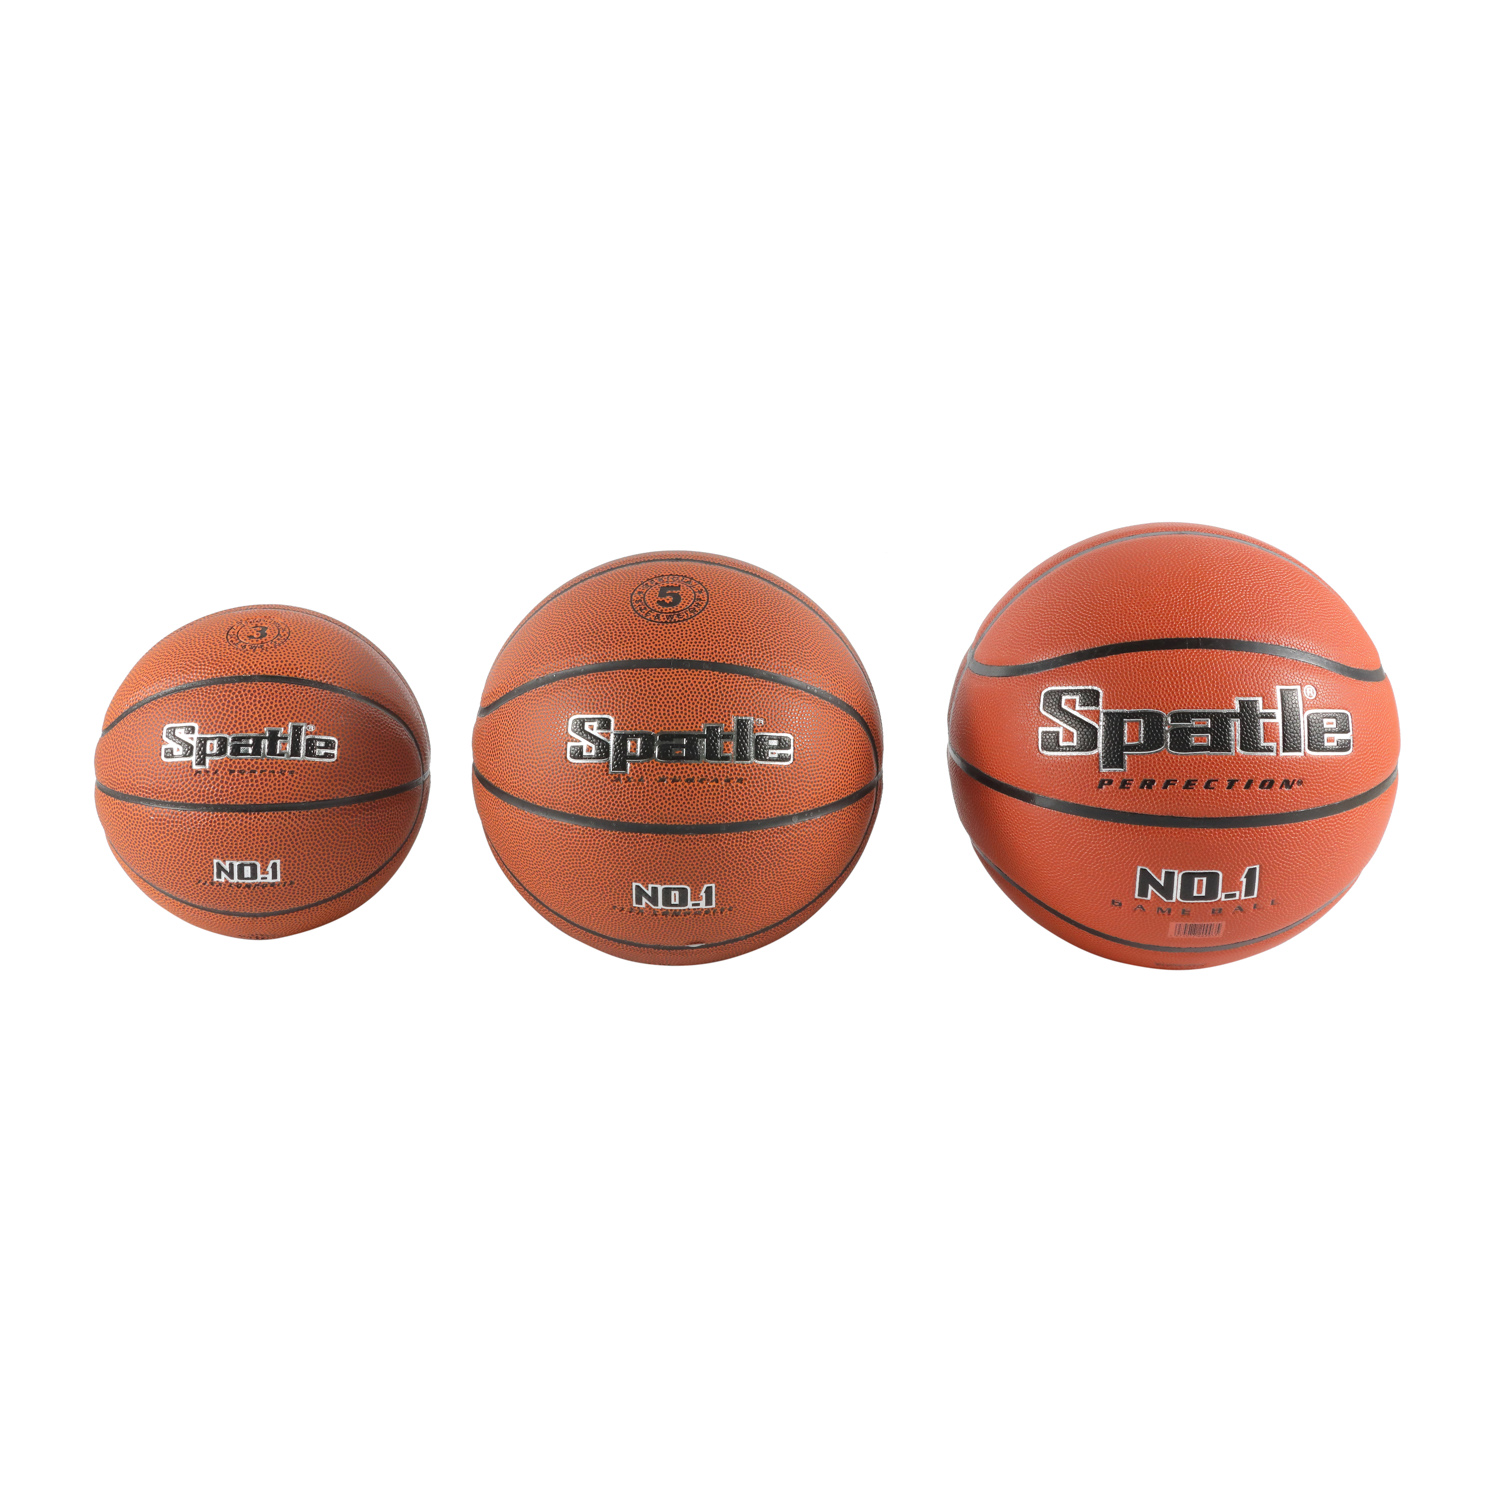 Microfiber Cover Laminated Basketball High Quality for Promotion